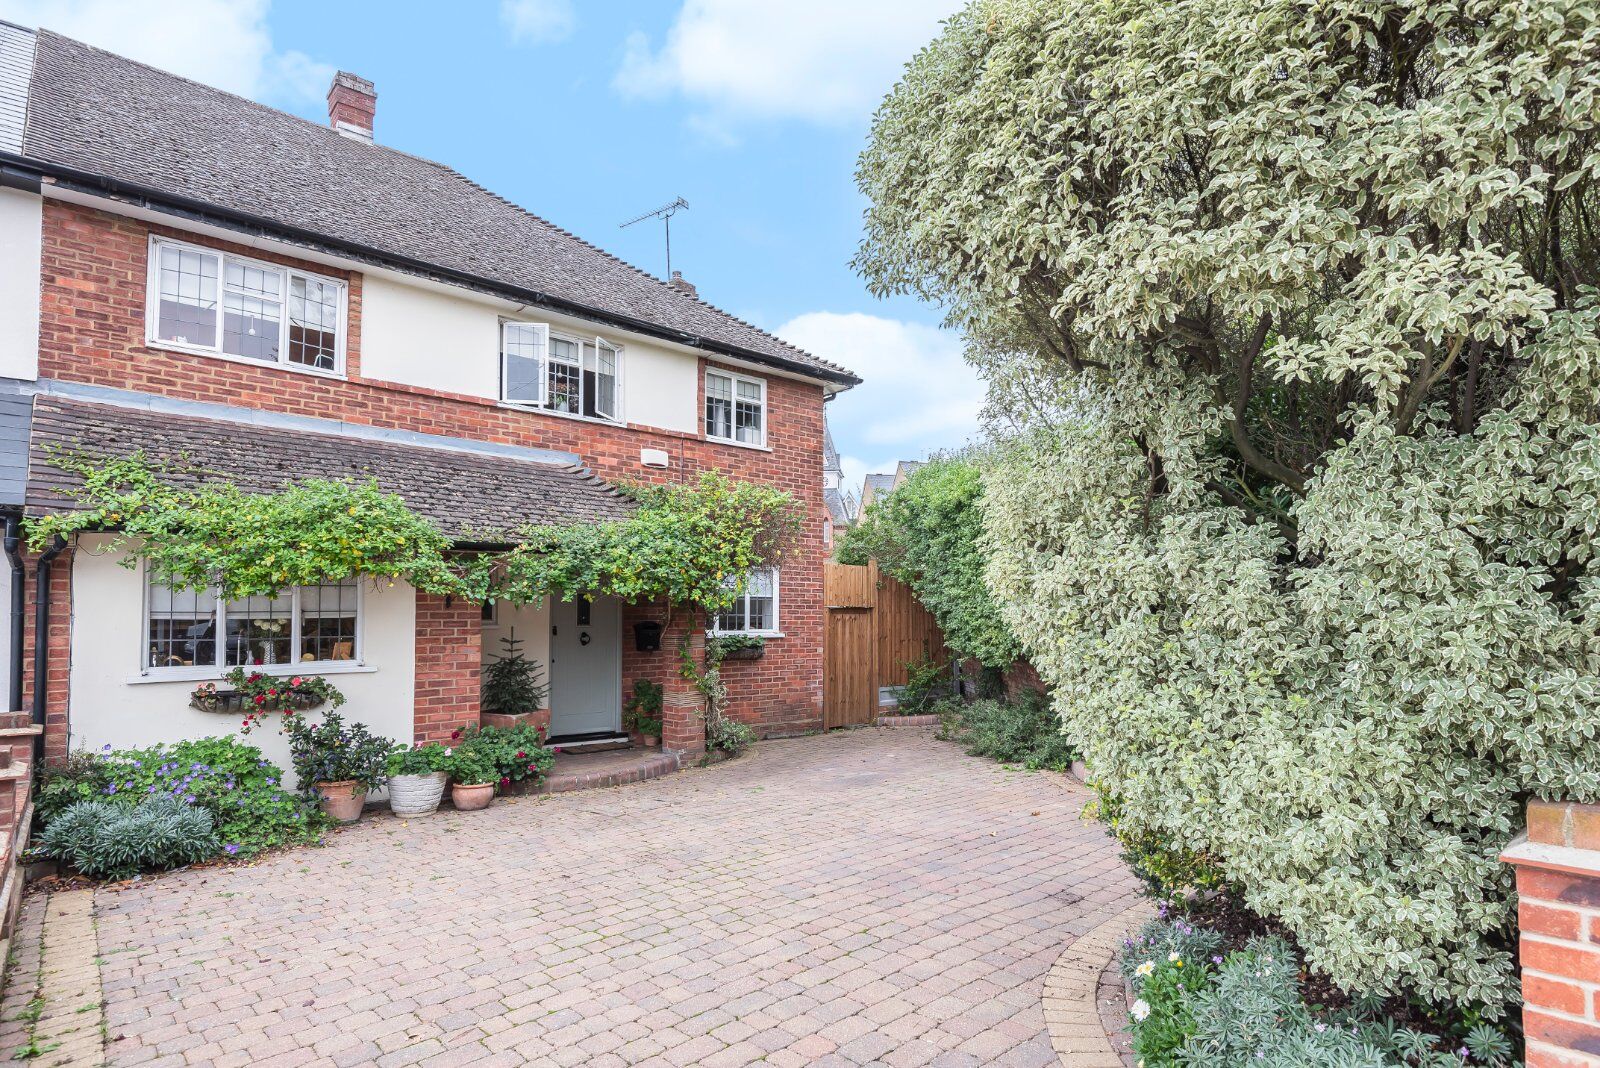 3 bedroom semi detached house for sale Brook Road, Loughton, IG10, main image